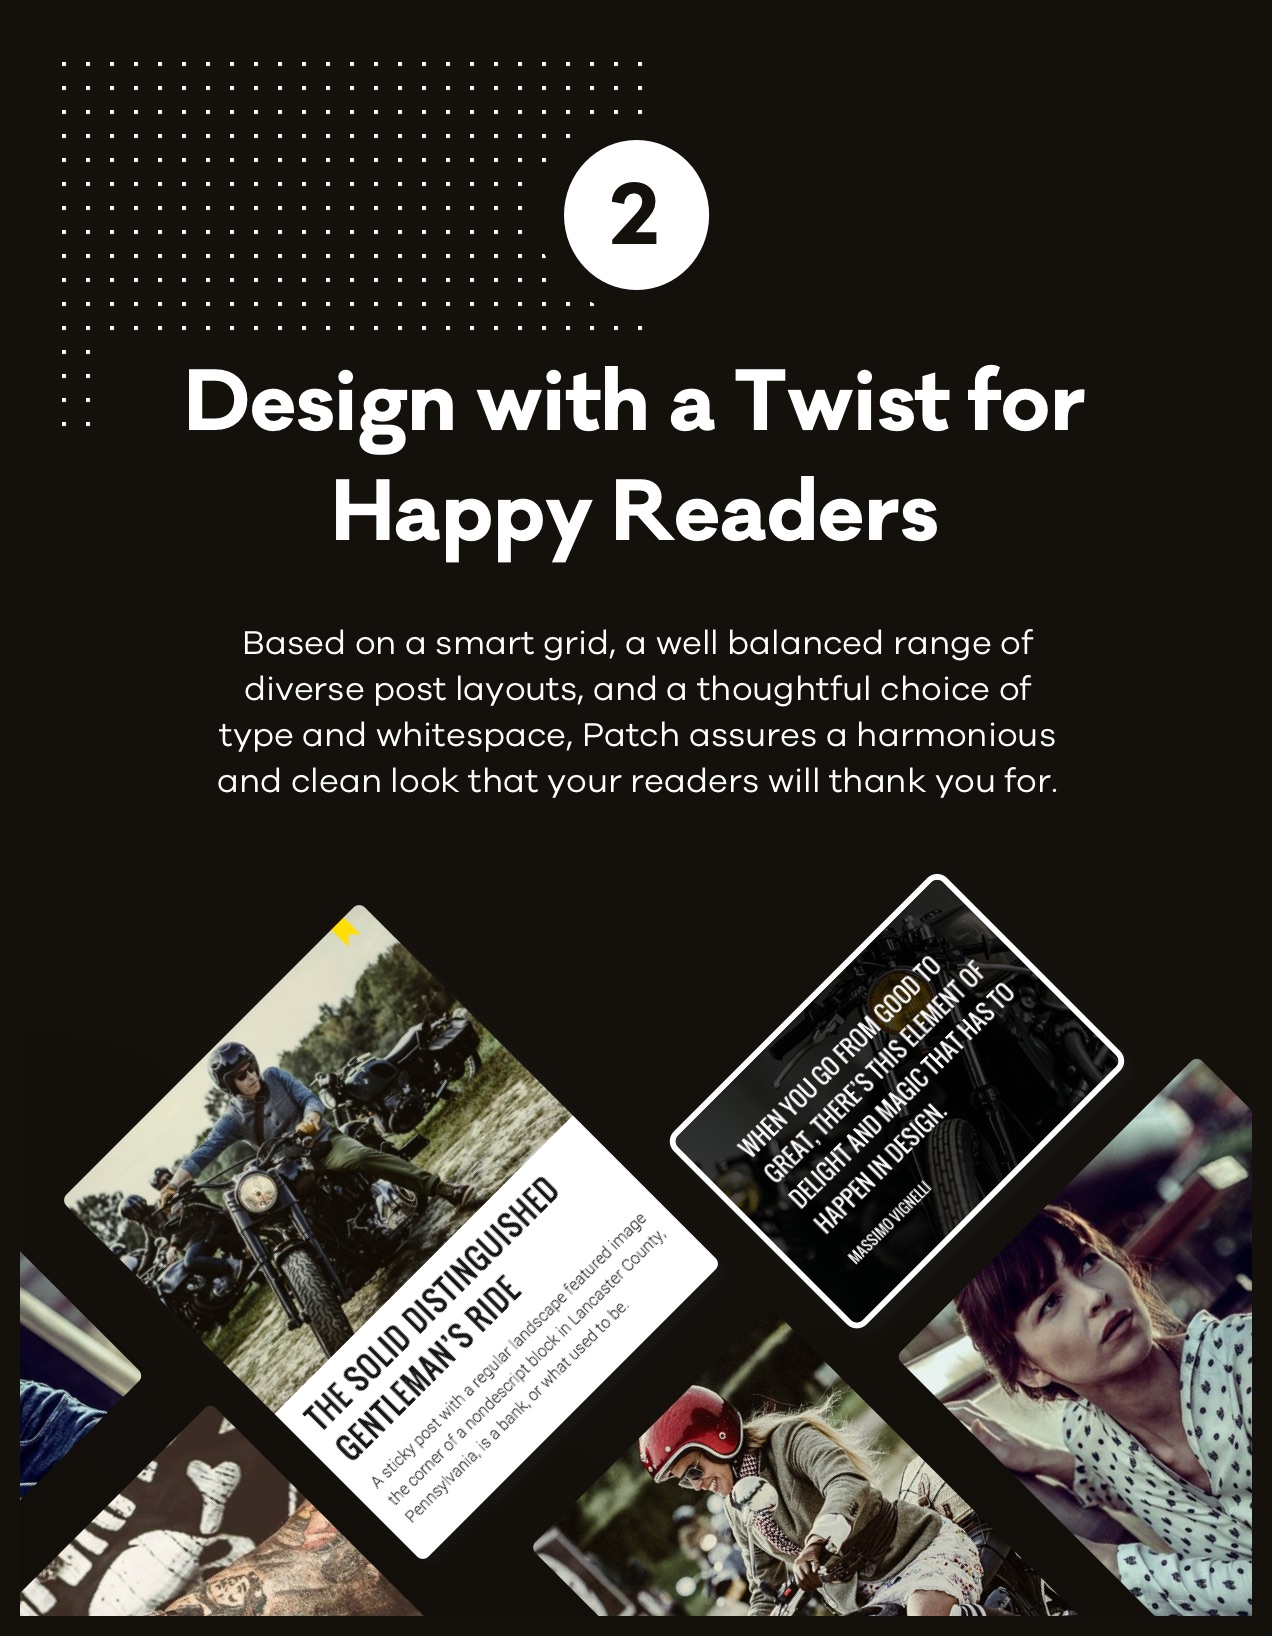 Design with a Twist for Happy Readers